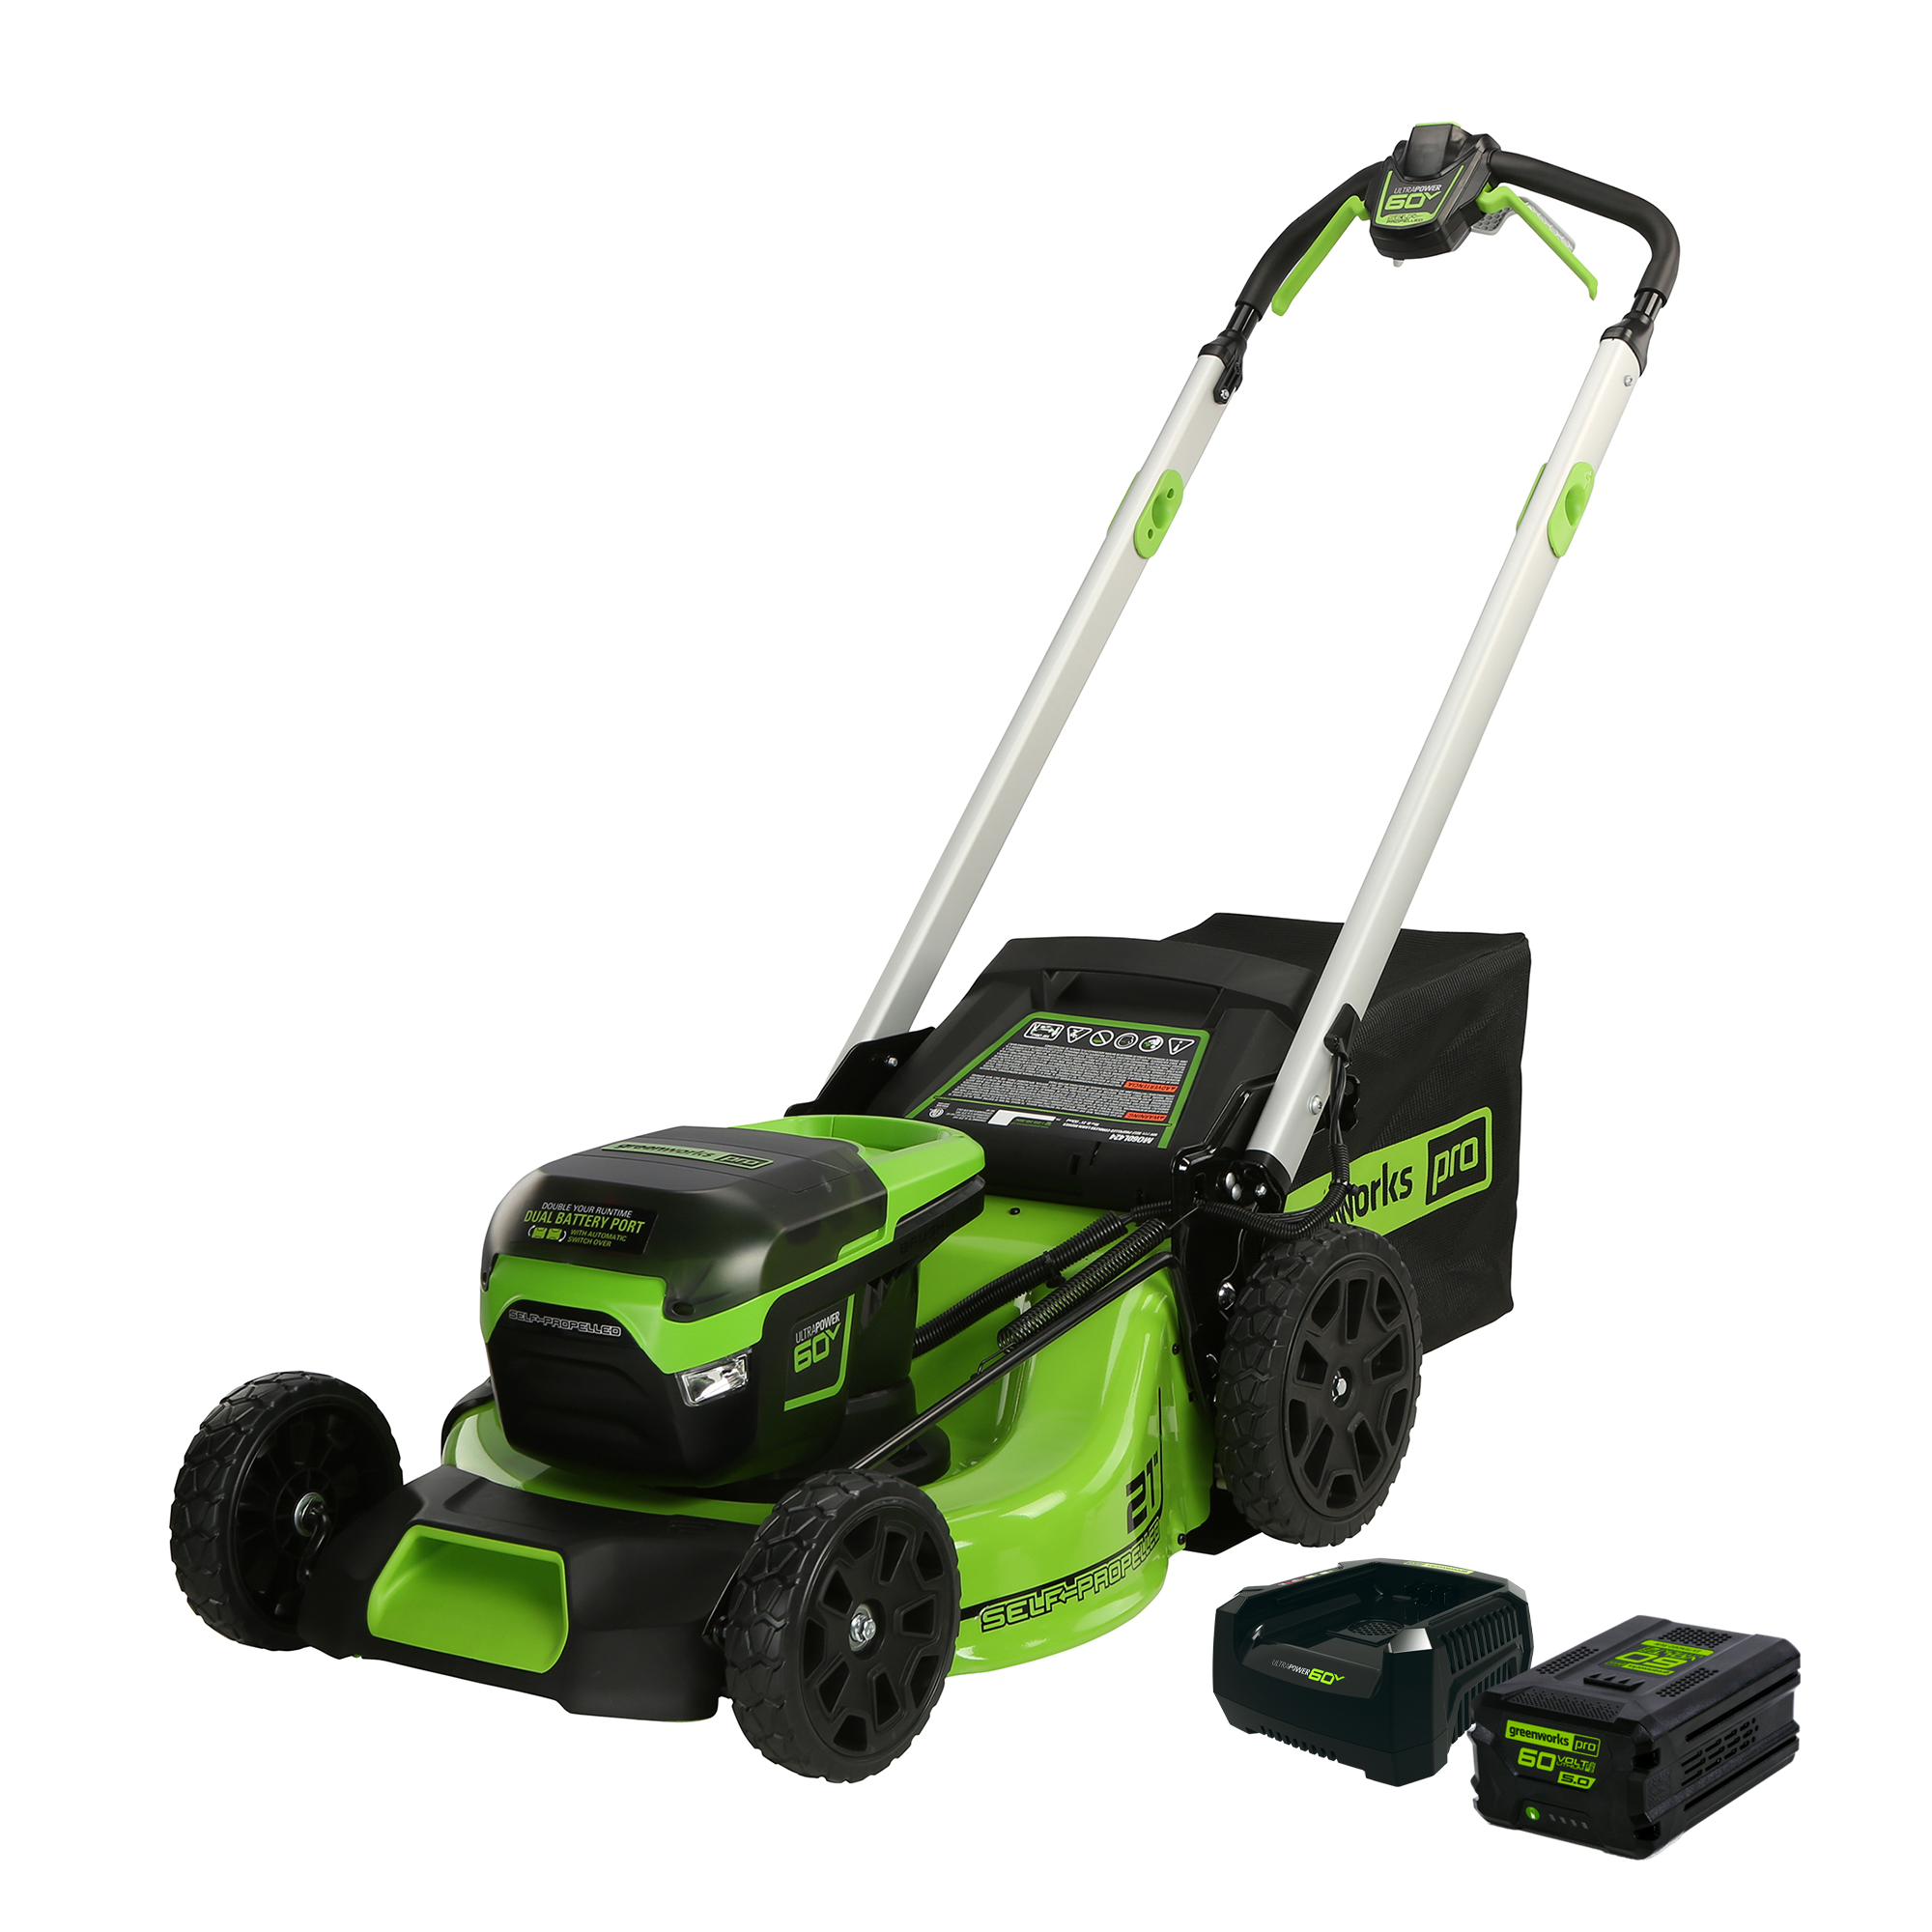 60V 21 Brushless Self-Propelled Lawn Mower, 5.0Ah Battery and Charger –  Greenworks Tools Canada Inc.